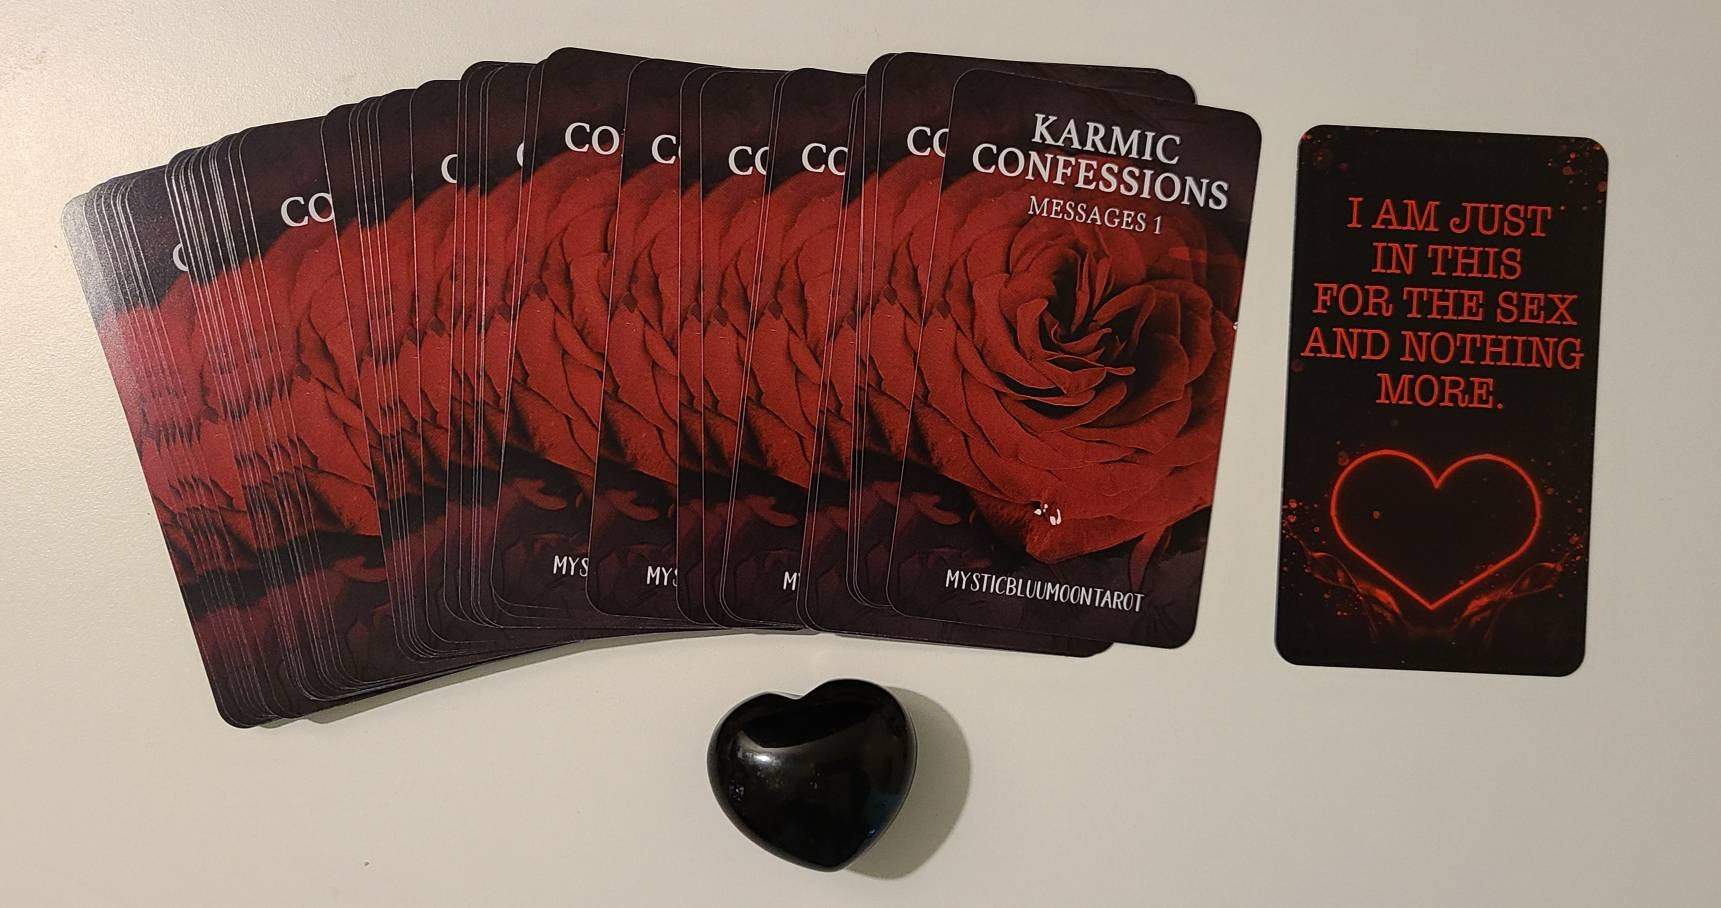 Karmic Confessions Messages 1 Oracle Deck Tarot Cards Messages From The Other Woman Mysticbluumoontarot - MysticBluuMoonTarot